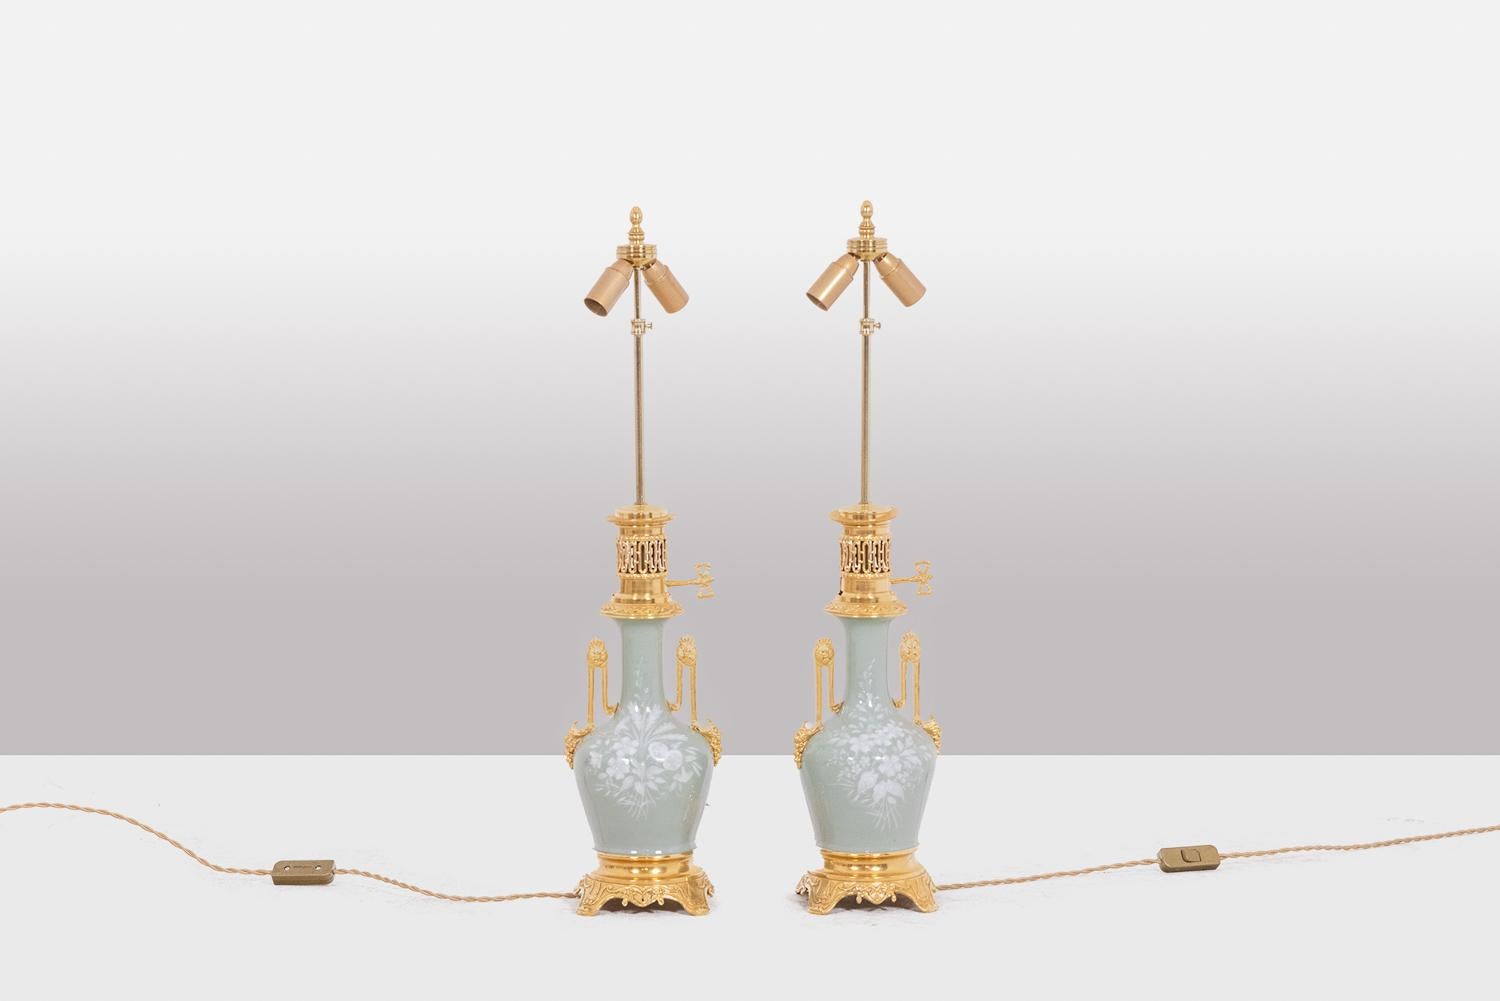 Pair of baluster-shaped Celadon porcelain and gilded bronze lamps, the porcelain decorated with white flowers. Quadripod base decorated with motifs, top of the frame decorated with an openwork gallery and a key. Finely decorated handles.

French